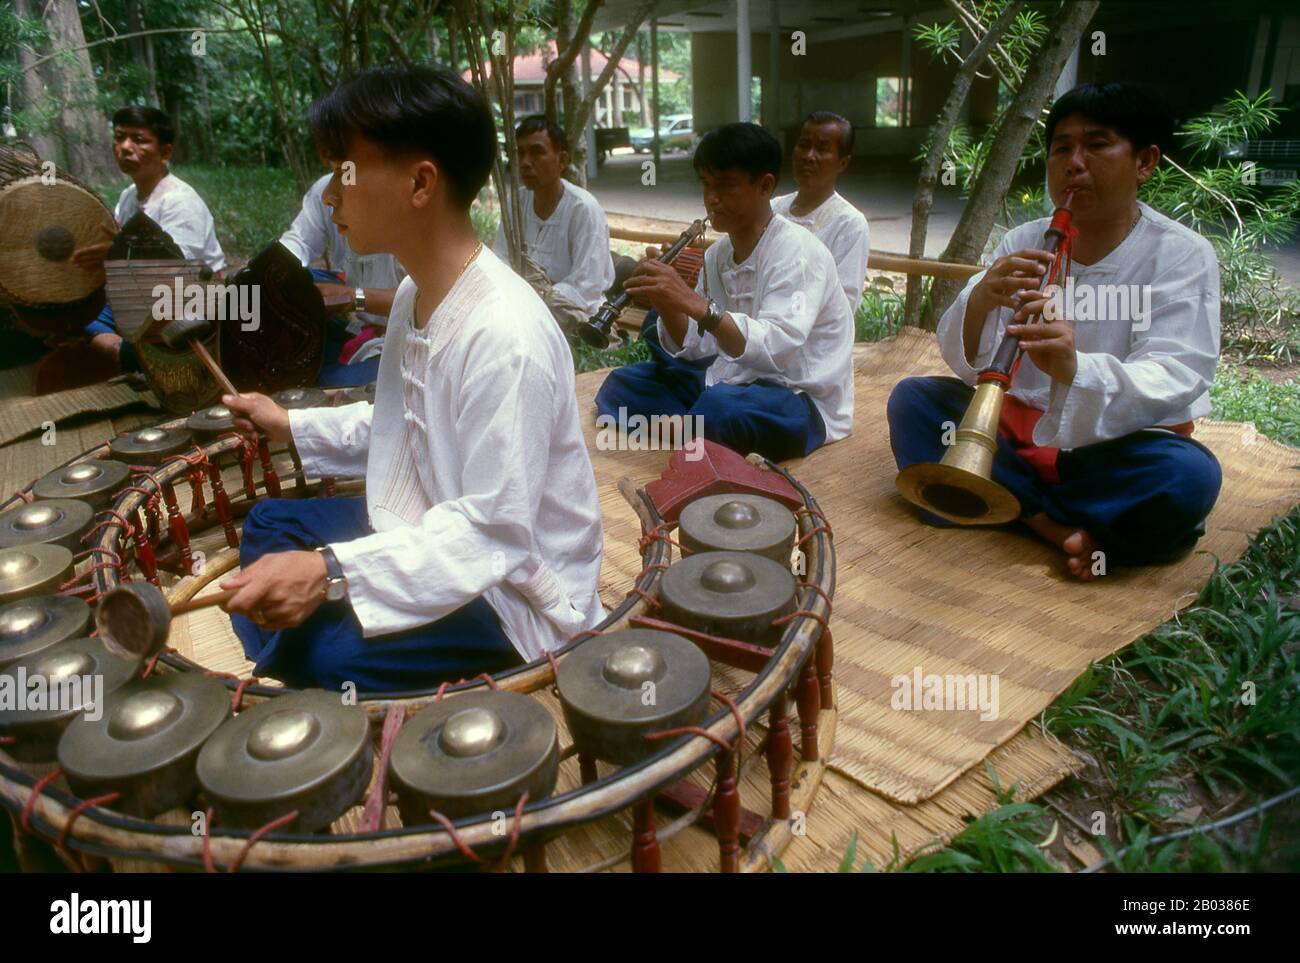 A piphat is a kind of ensemble in the classical music of Thailand, which features wind and percussion instruments. It is considered the primary form of ensemble for the interpretation of the most sacred and 'high-class' compositions of the Thai classical repertoire, including the Buddhist invocation entitled sathukan as well as the suites called phleng rueang. It is also used to accompany traditional Thai theatrical and dance forms including khon (masked dance-drama), lakhon (classical dance), and shadow puppet theater. Stock Photo